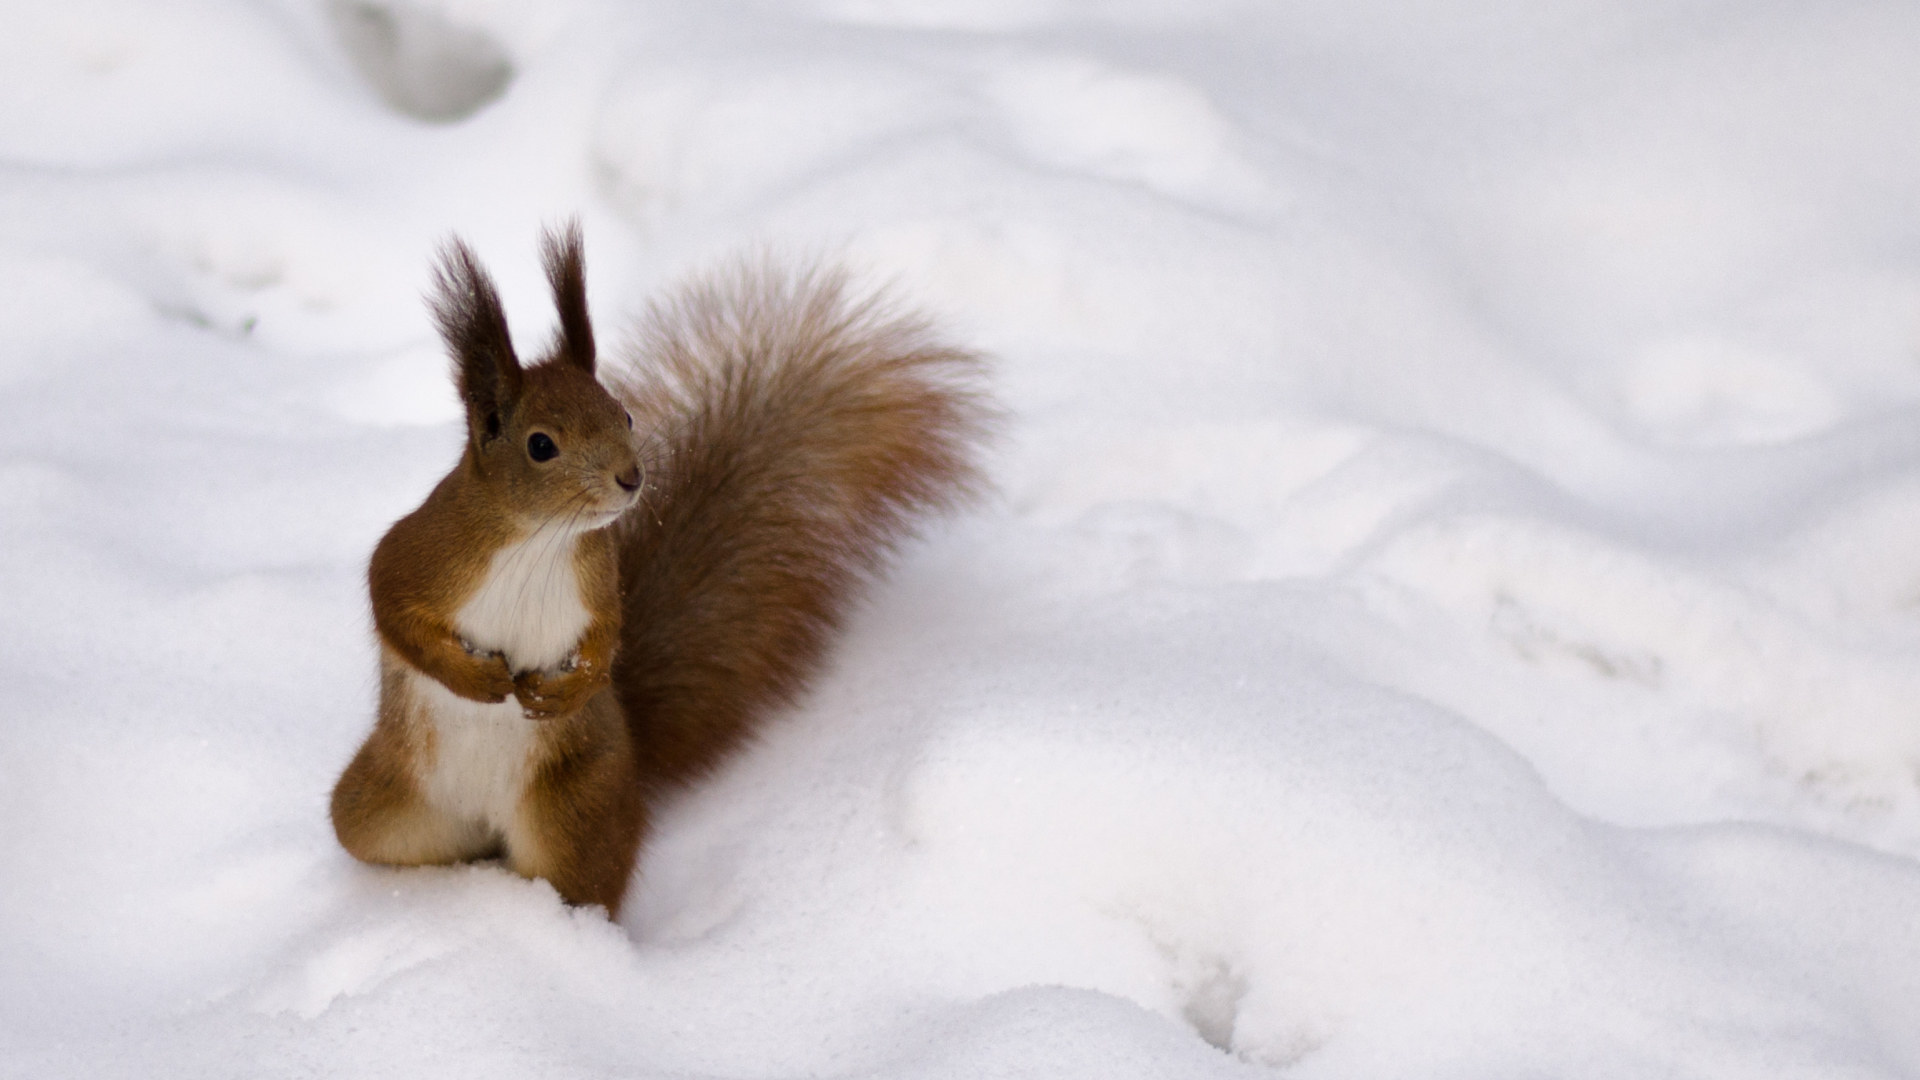 Funny Squirrel On Snow wallpaper 1920x1080